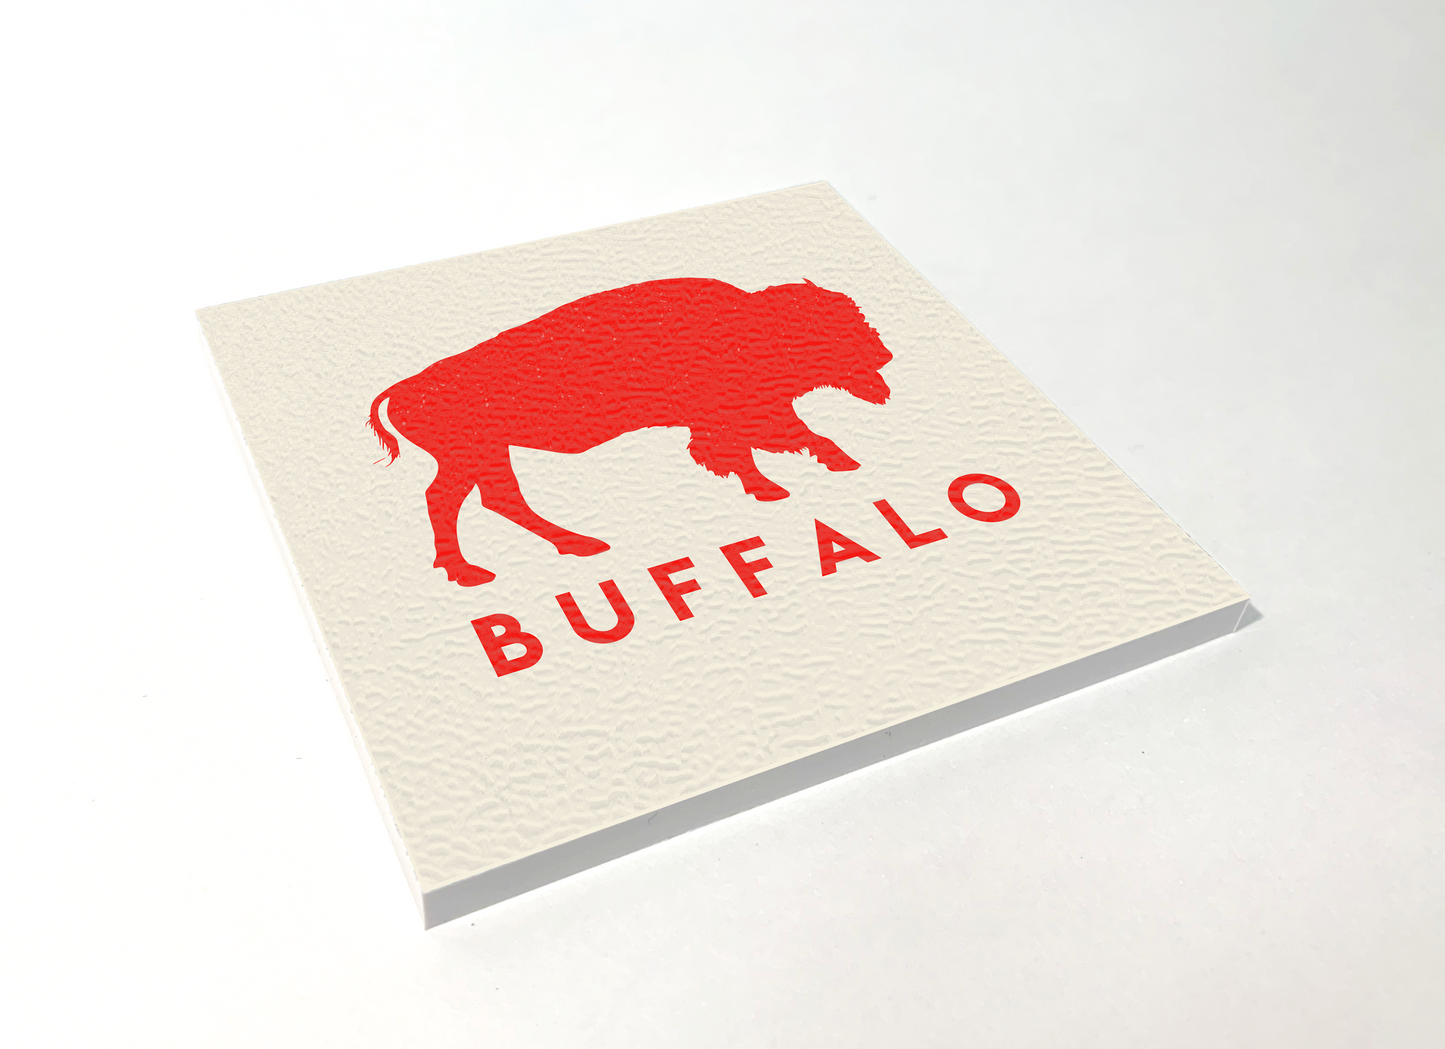 Buffalo Classic Red Square Coaster Designed and Handcrafted in Buffalo NY